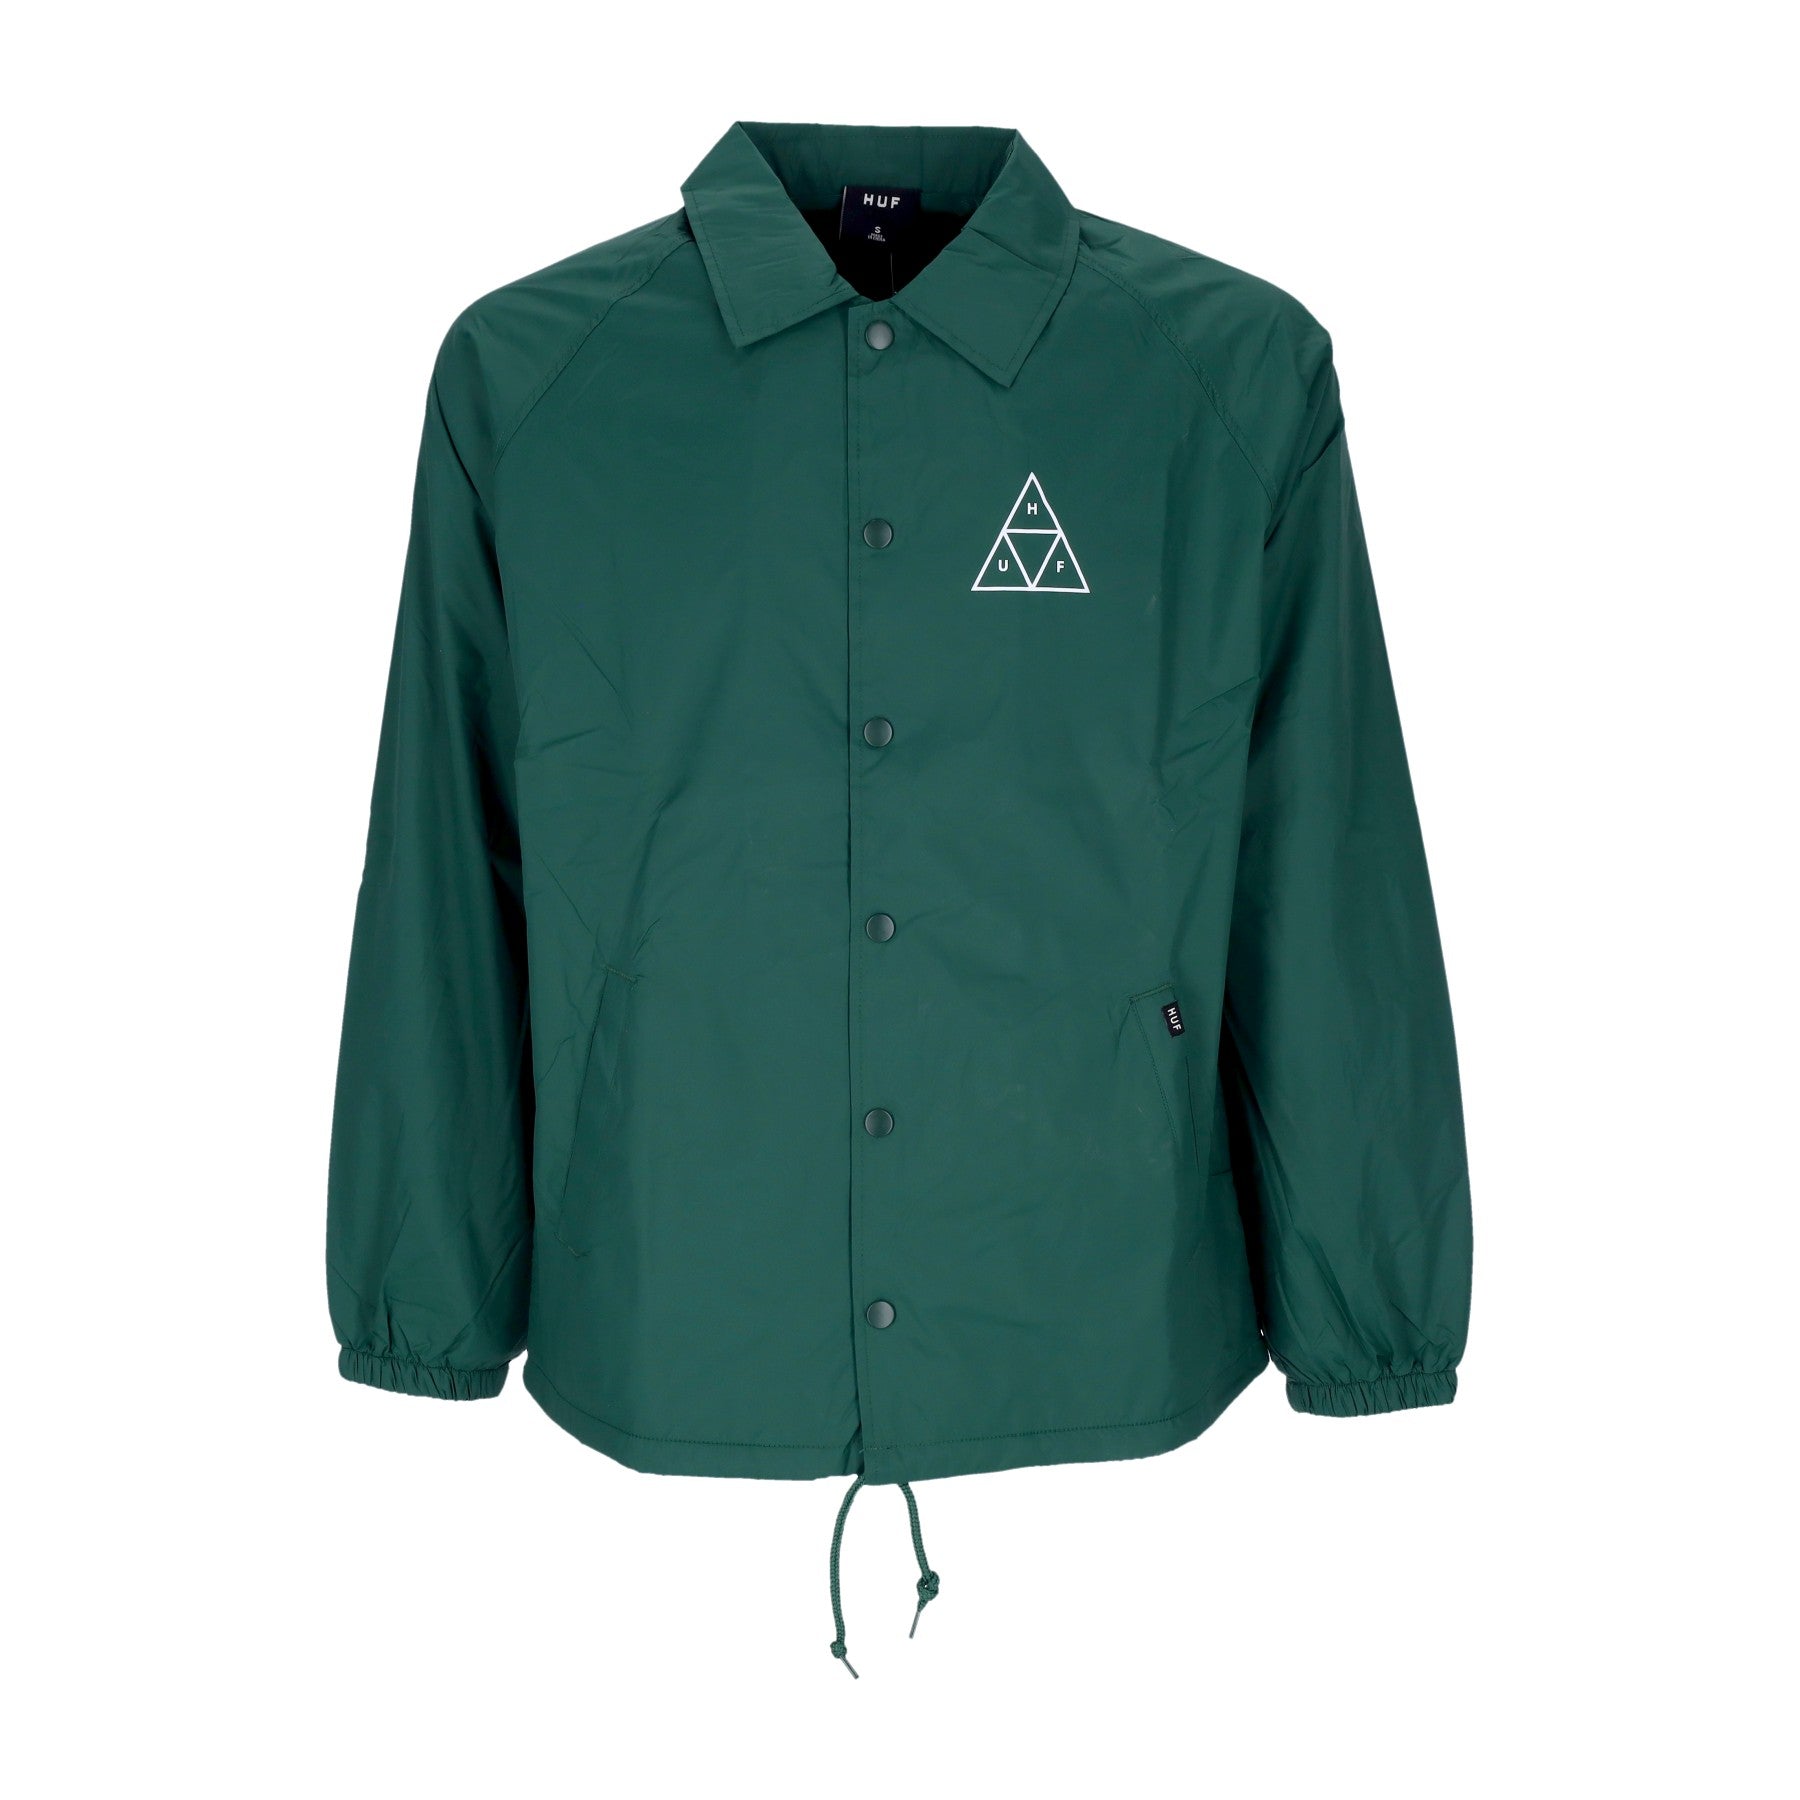 Huf, Giacca Coach Jacket Uomo Essentials Coaches Jacket, Forest Green